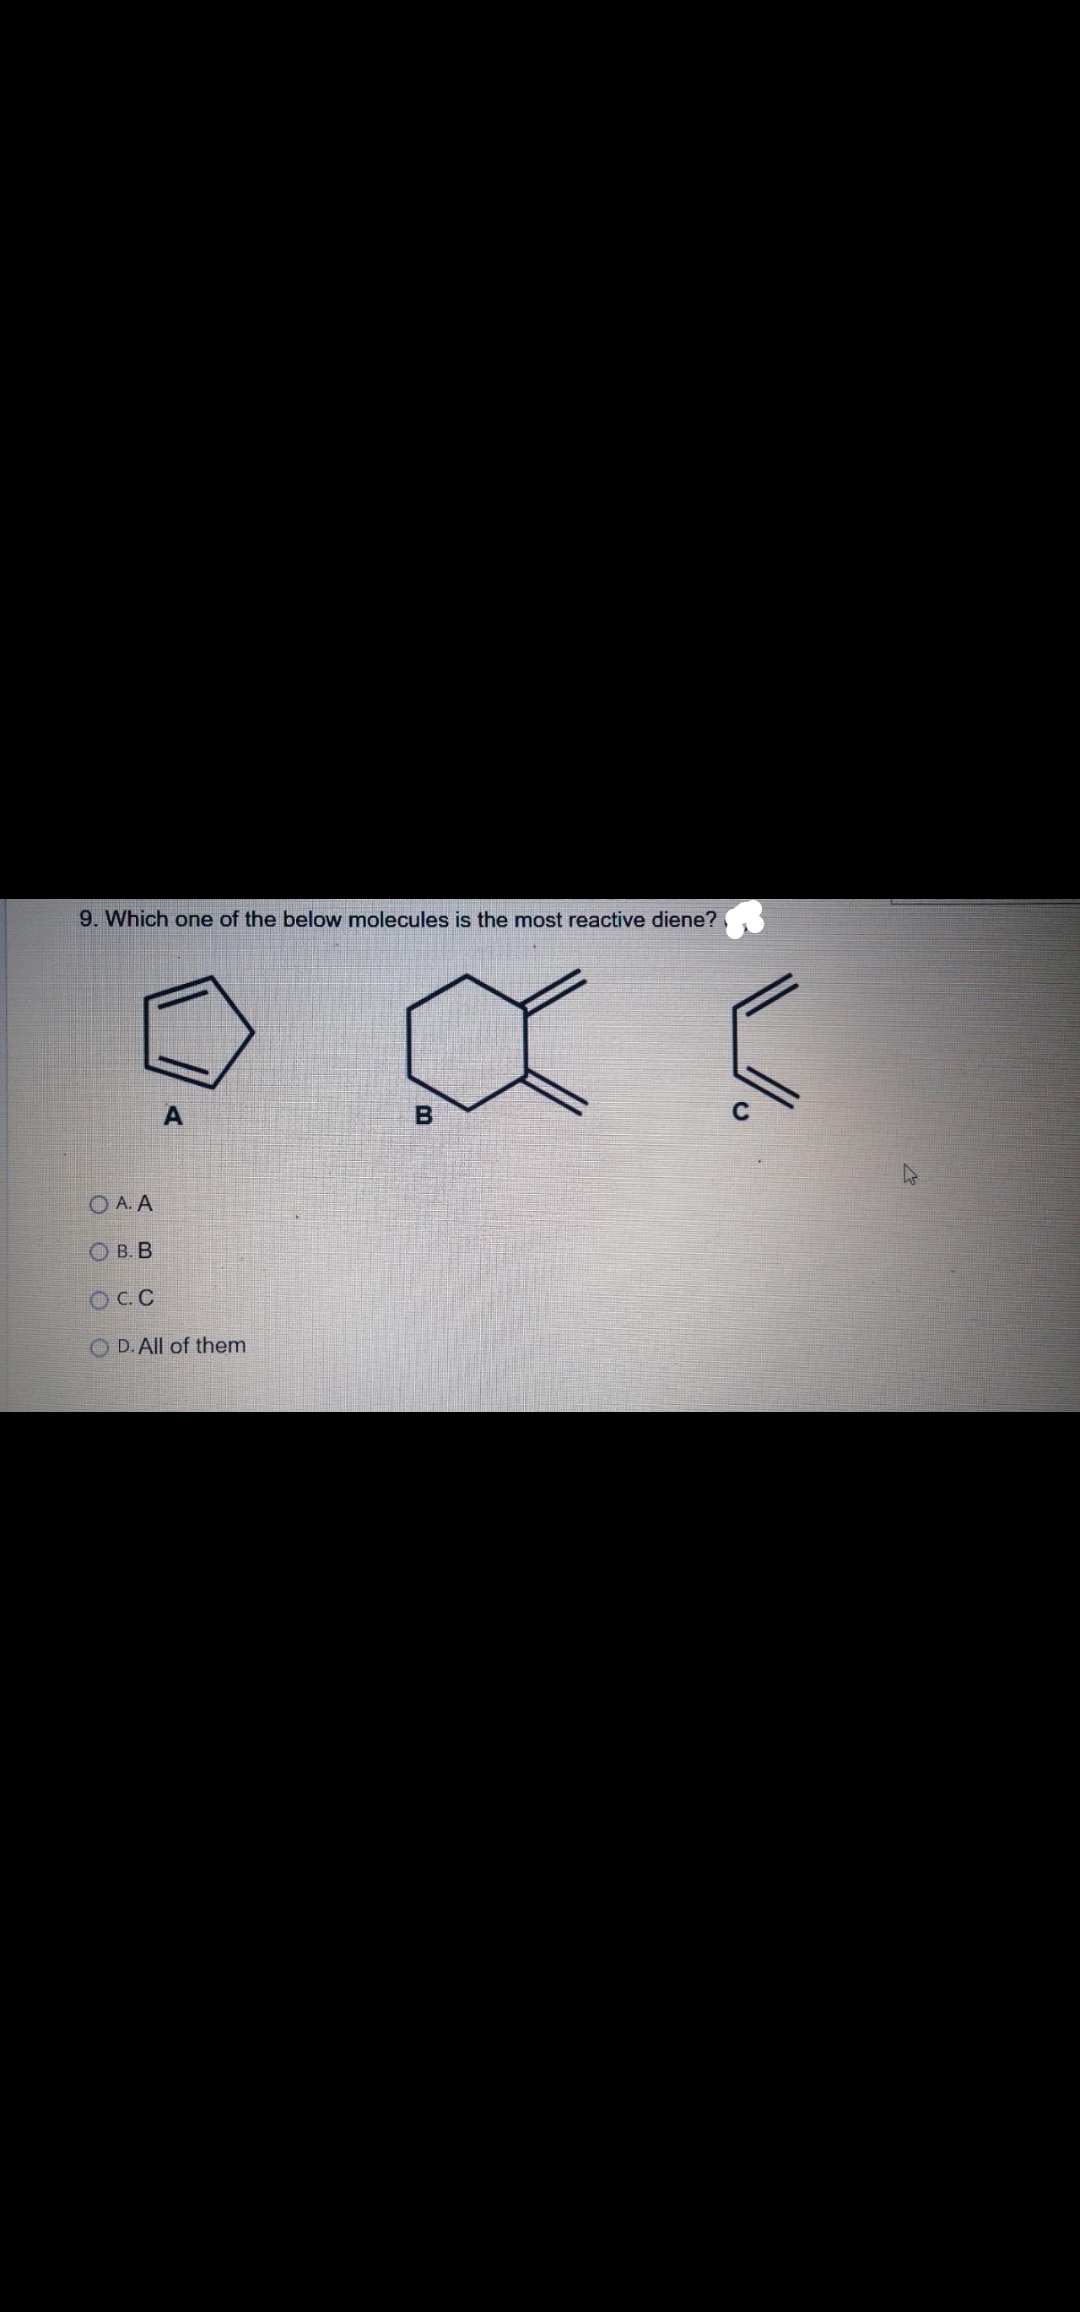 9. Which one of the below molecules is the most reactive diene?
O A. A
O B. B
OC.C
O D. All of them
